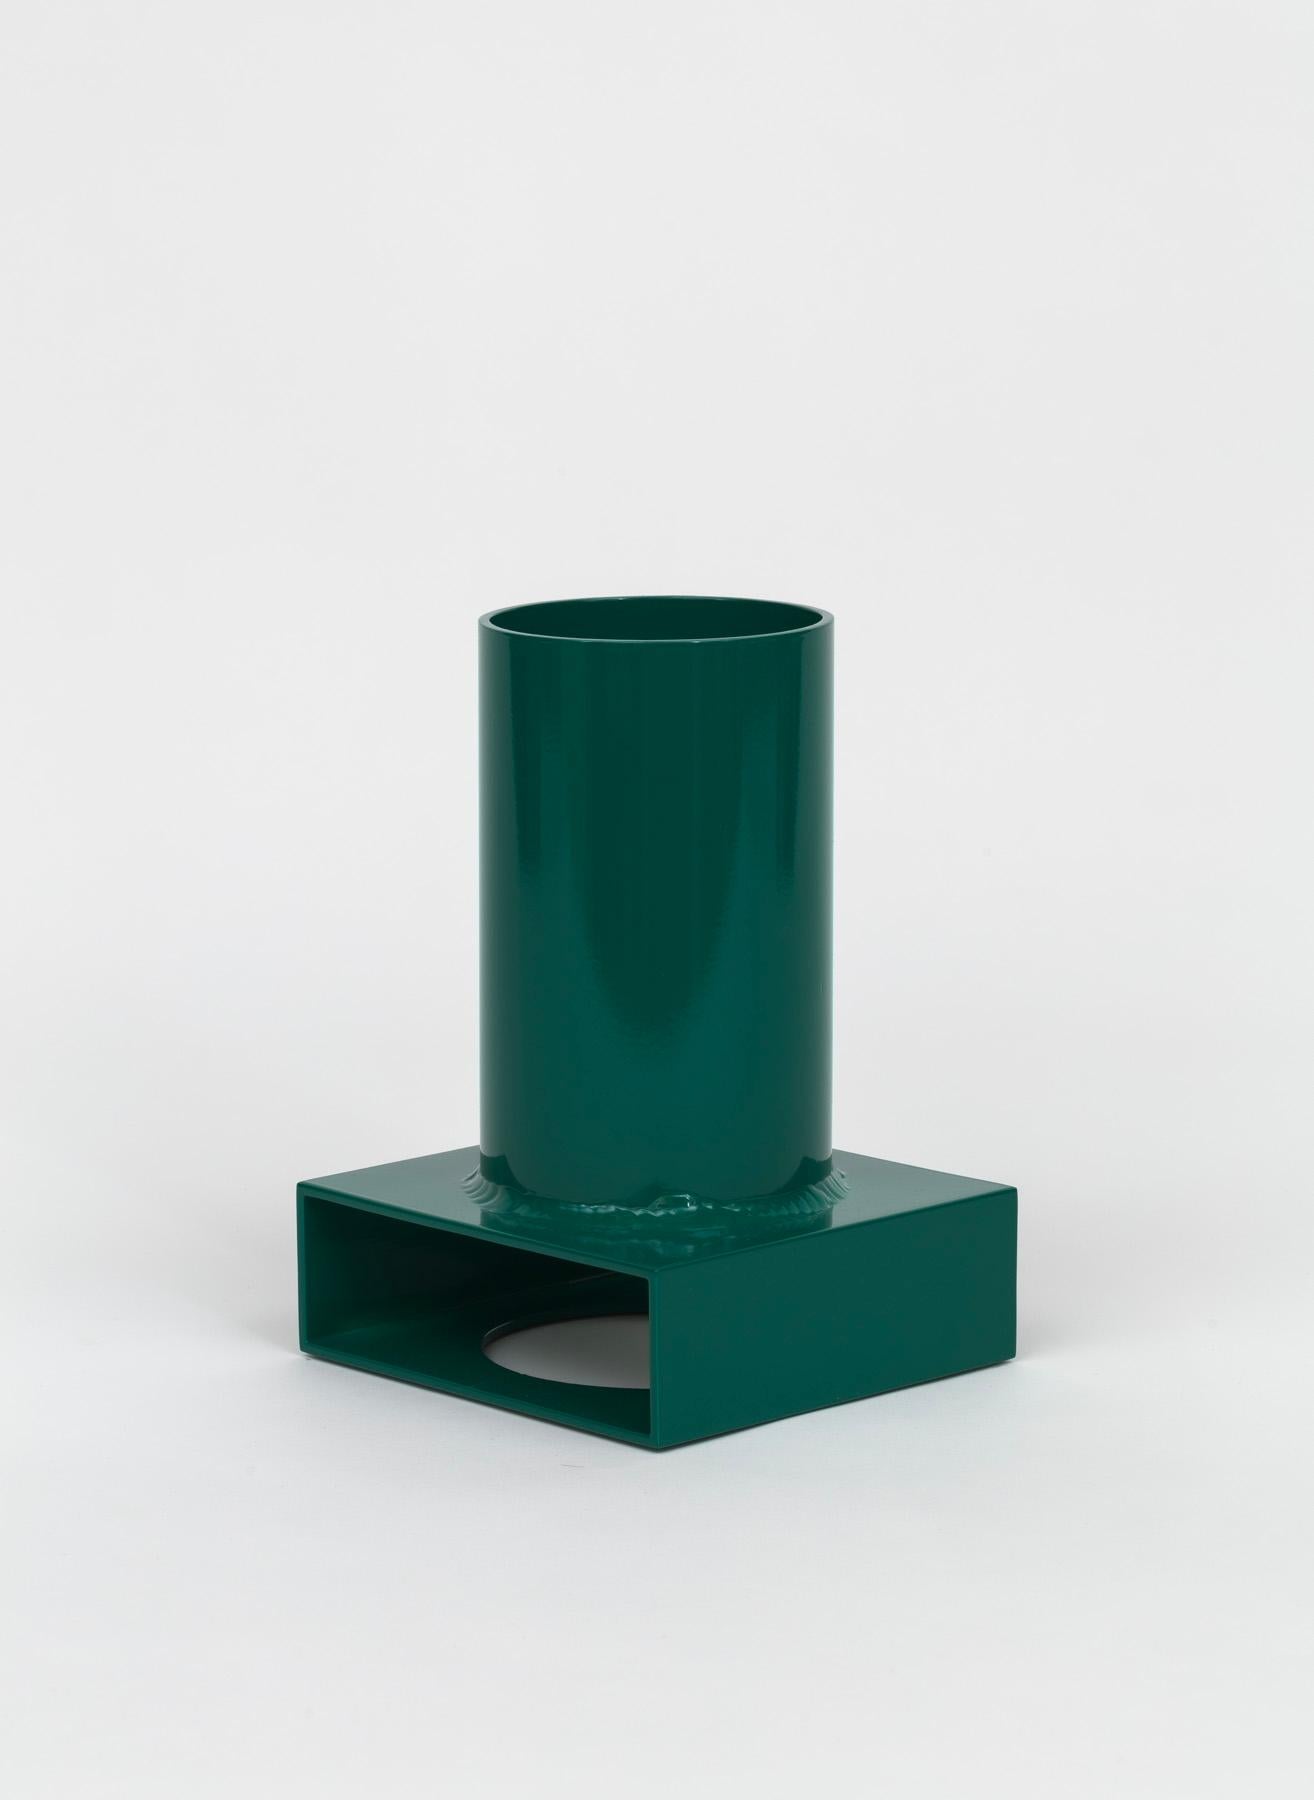 The Brutalist Tube Vase #002 is composed of common aluminum extrusion profiles – Simple round and rectangular tubing is precisely cut, drilled, and welded specific proportions in mind. The resulting relationship of parts, in this case, the